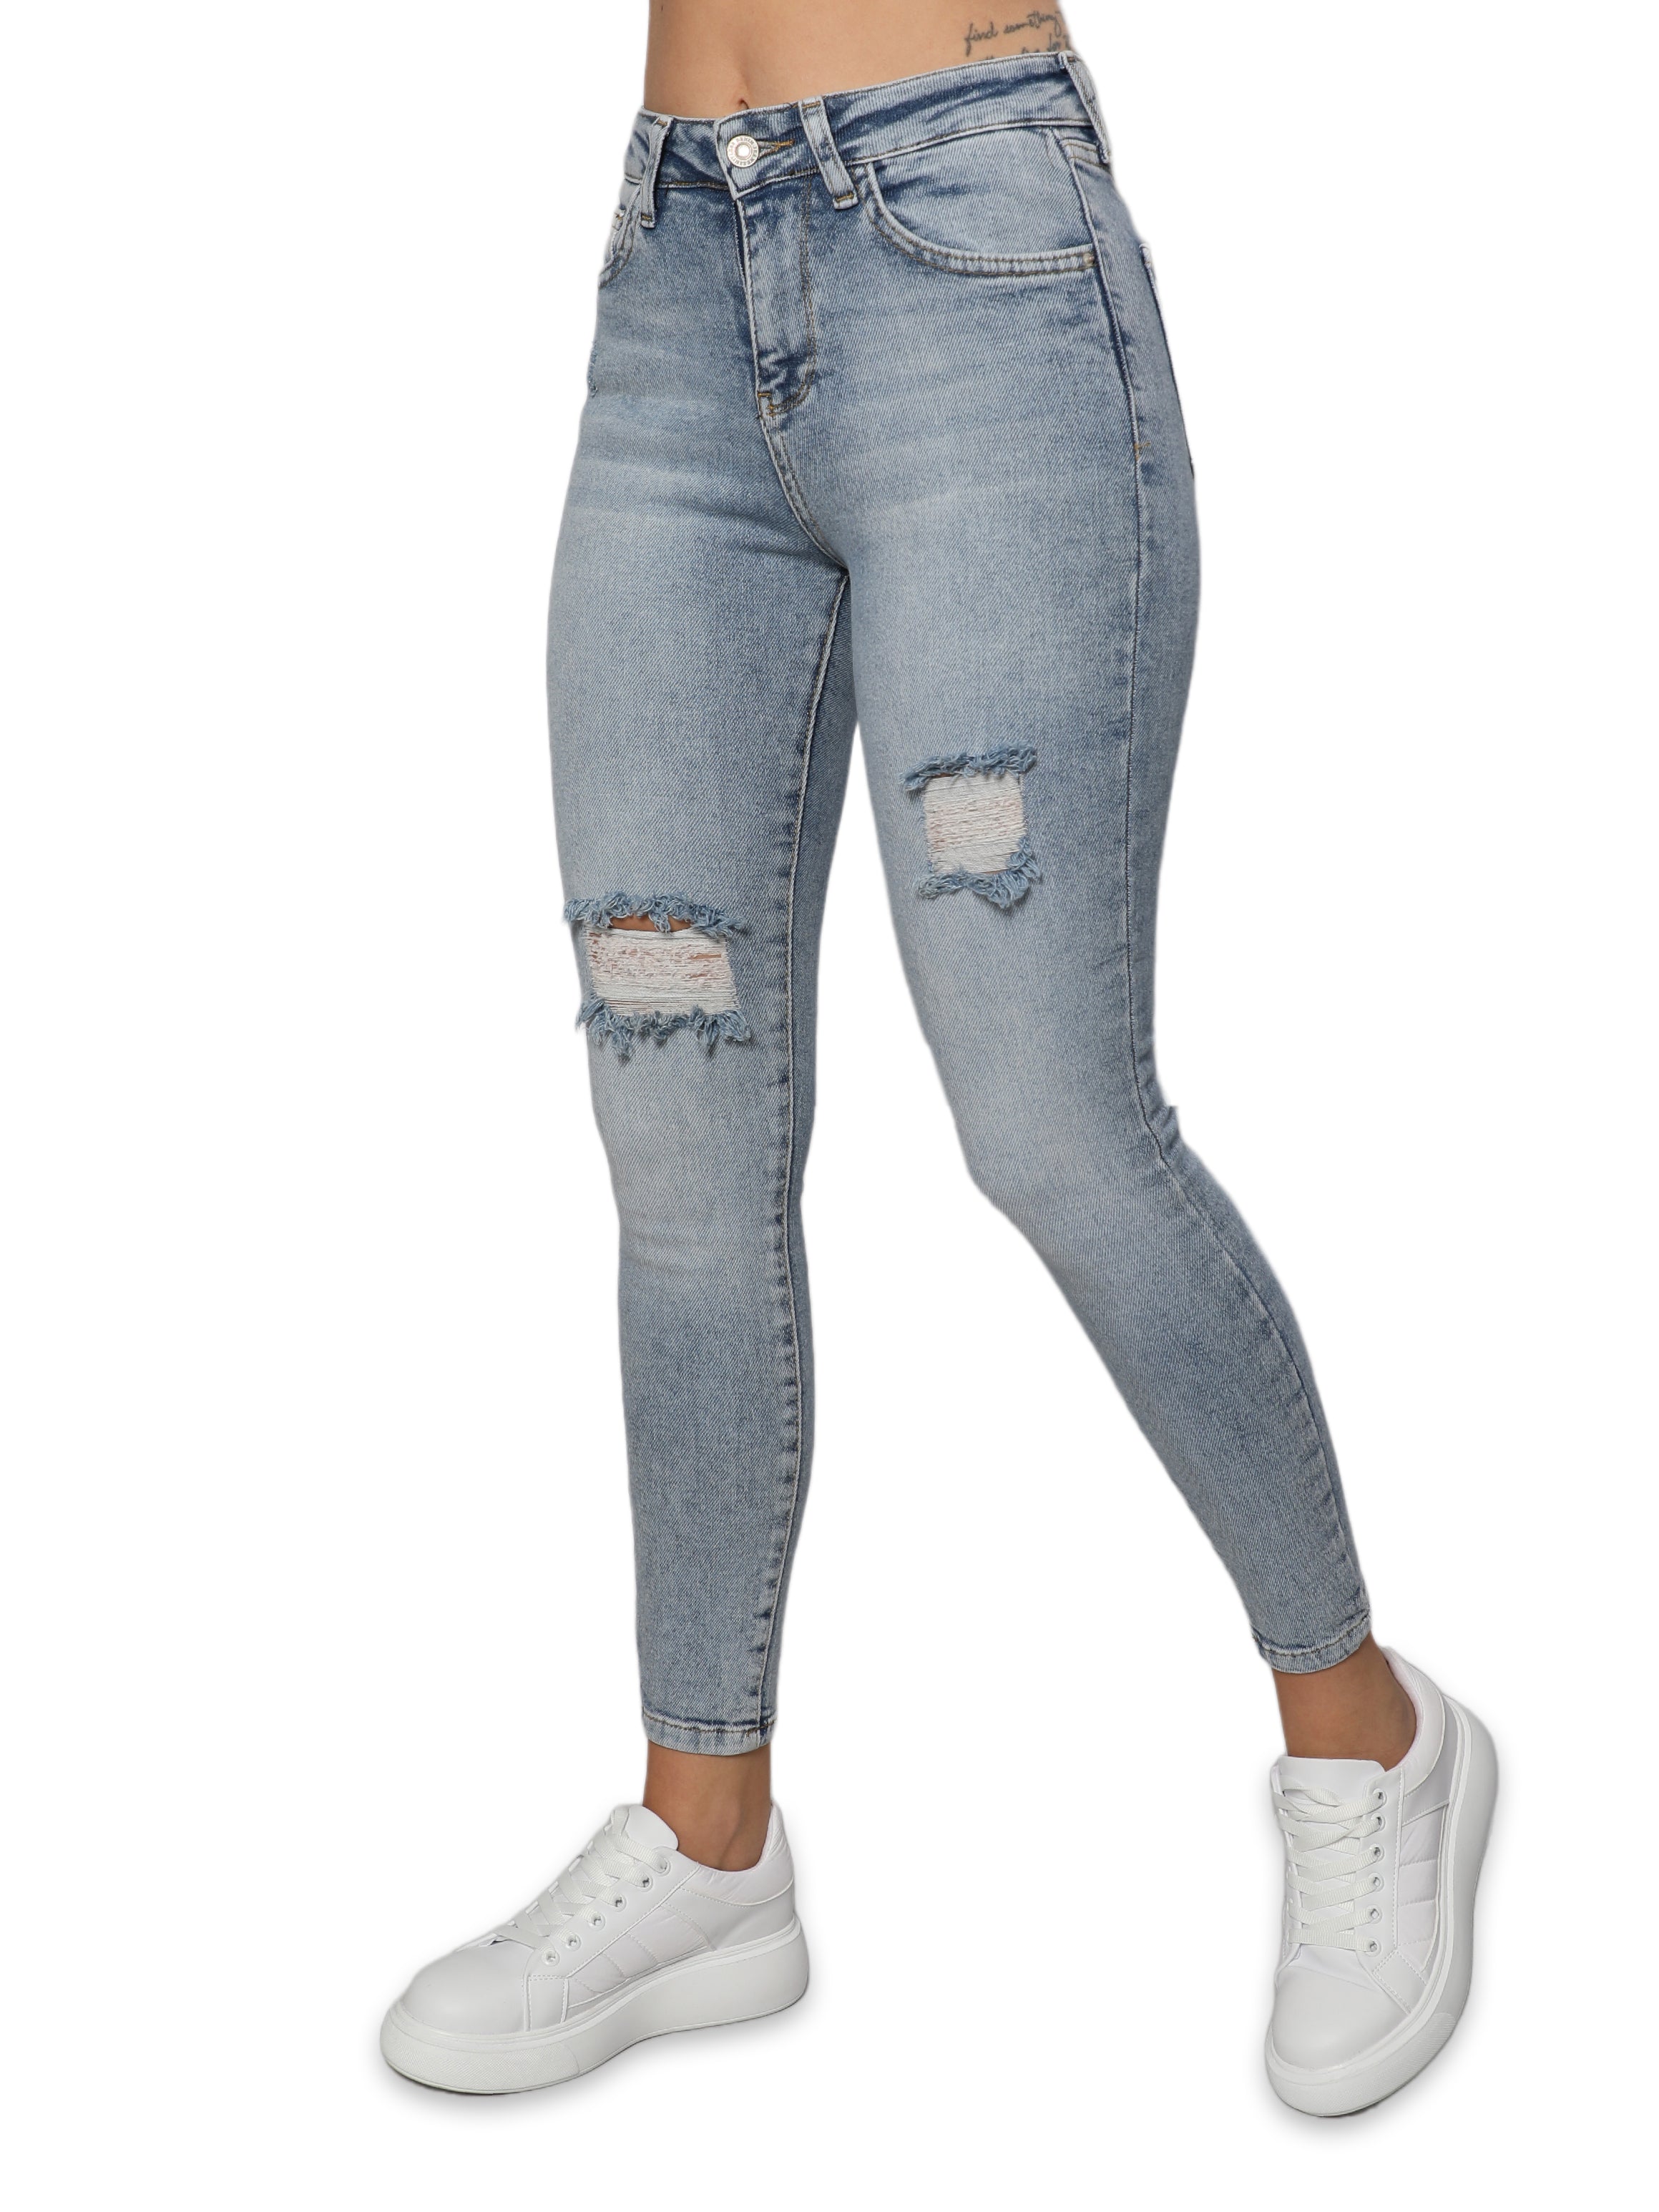 Women Skinny Blue Jeans With Ripped Design